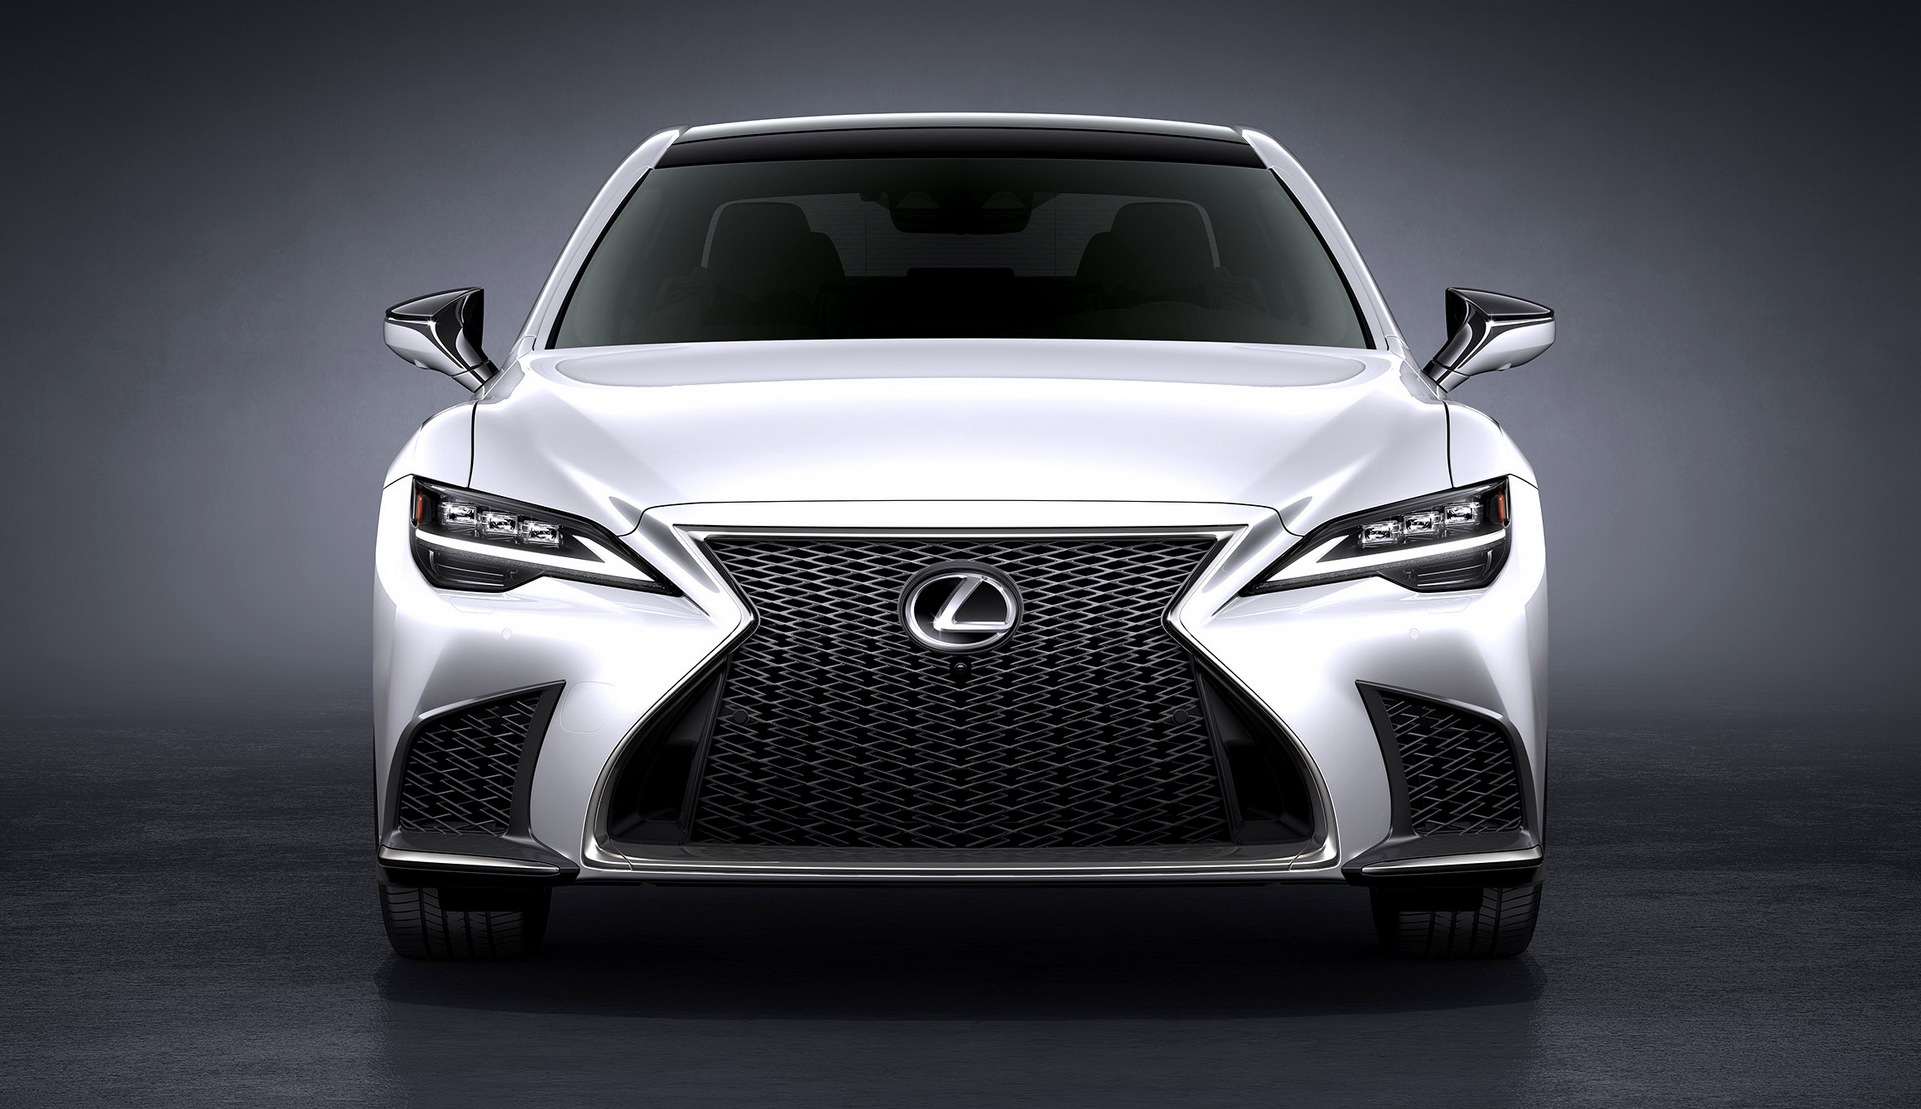 Lexus lowers the tone, but does not give up the spindle grid, despite the fact that consumers say it's "off".